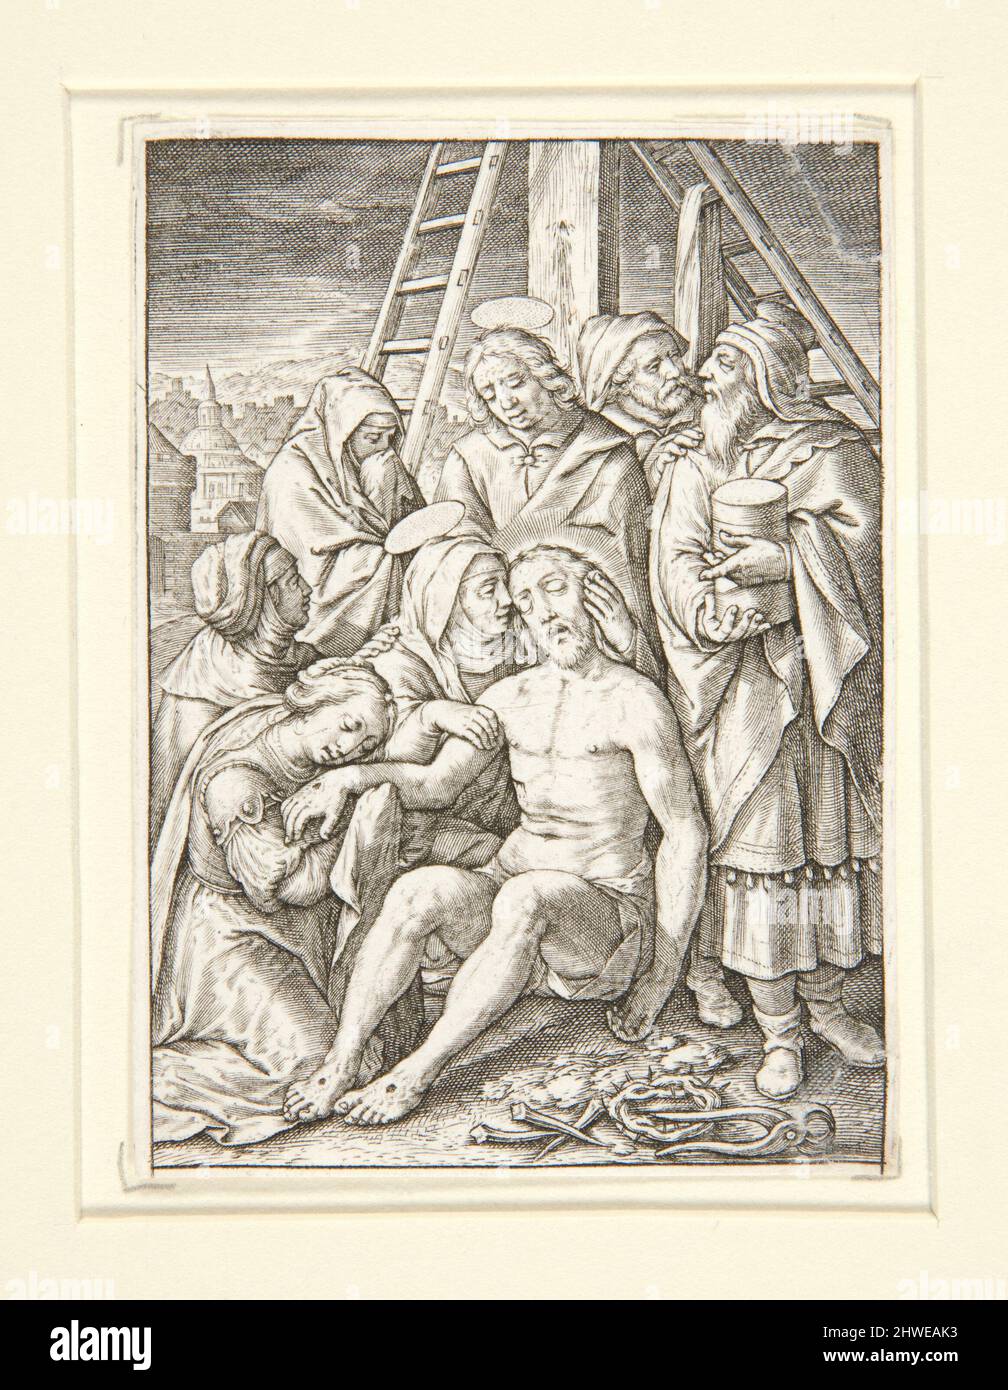 The Lamentation, from the series The Passion of Christ.  Artist: Hieronymus Wierix, Flemish, 1553–1619 Stock Photo